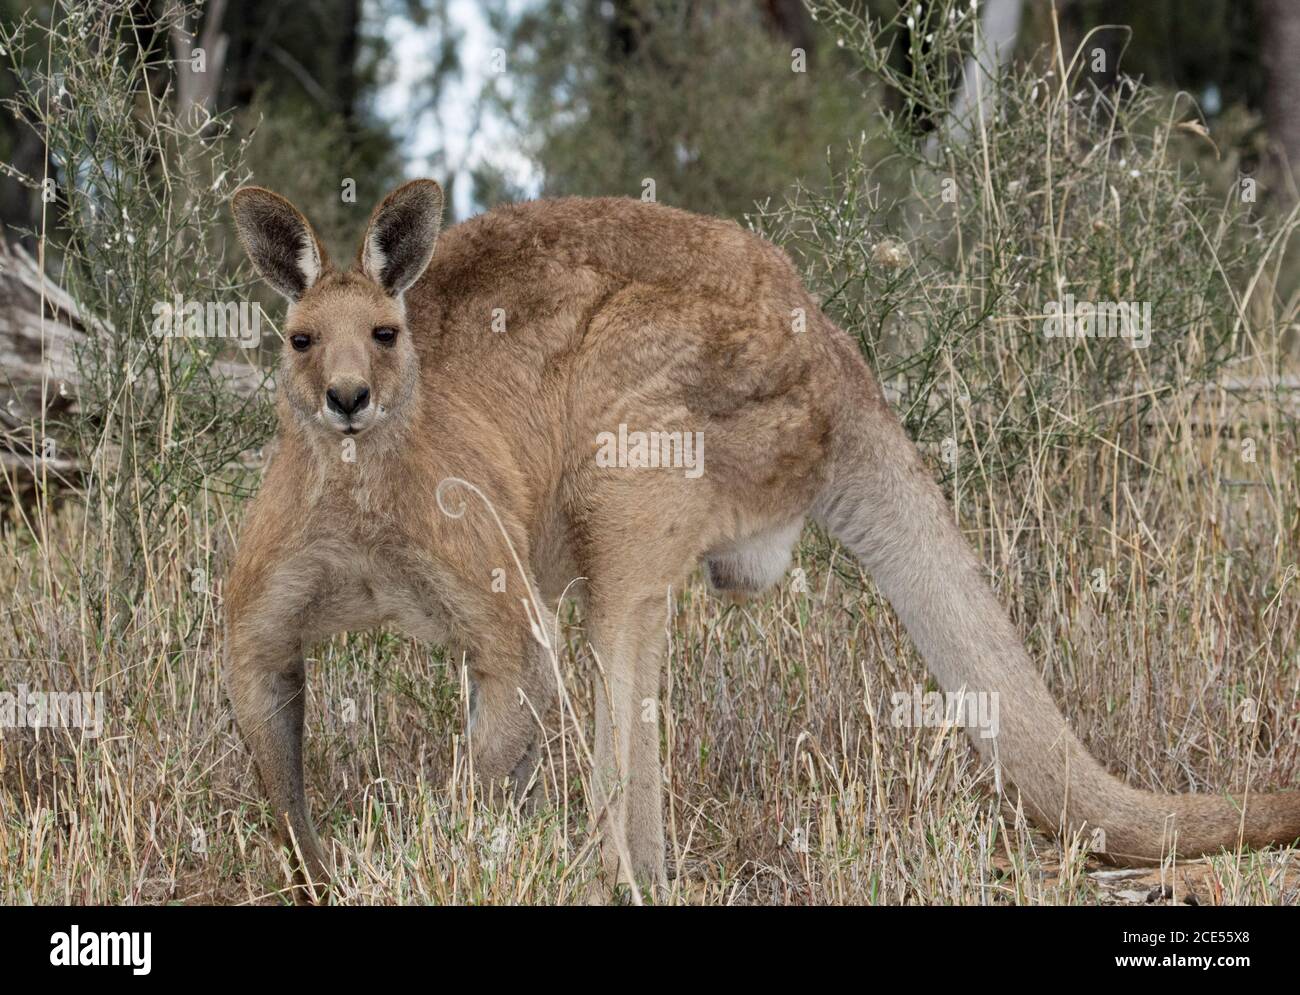 Large male Australian Eastern grey kangaroo, in the wild, with background of tall grasses & trees, staring at camera with alert expression Stock Photo